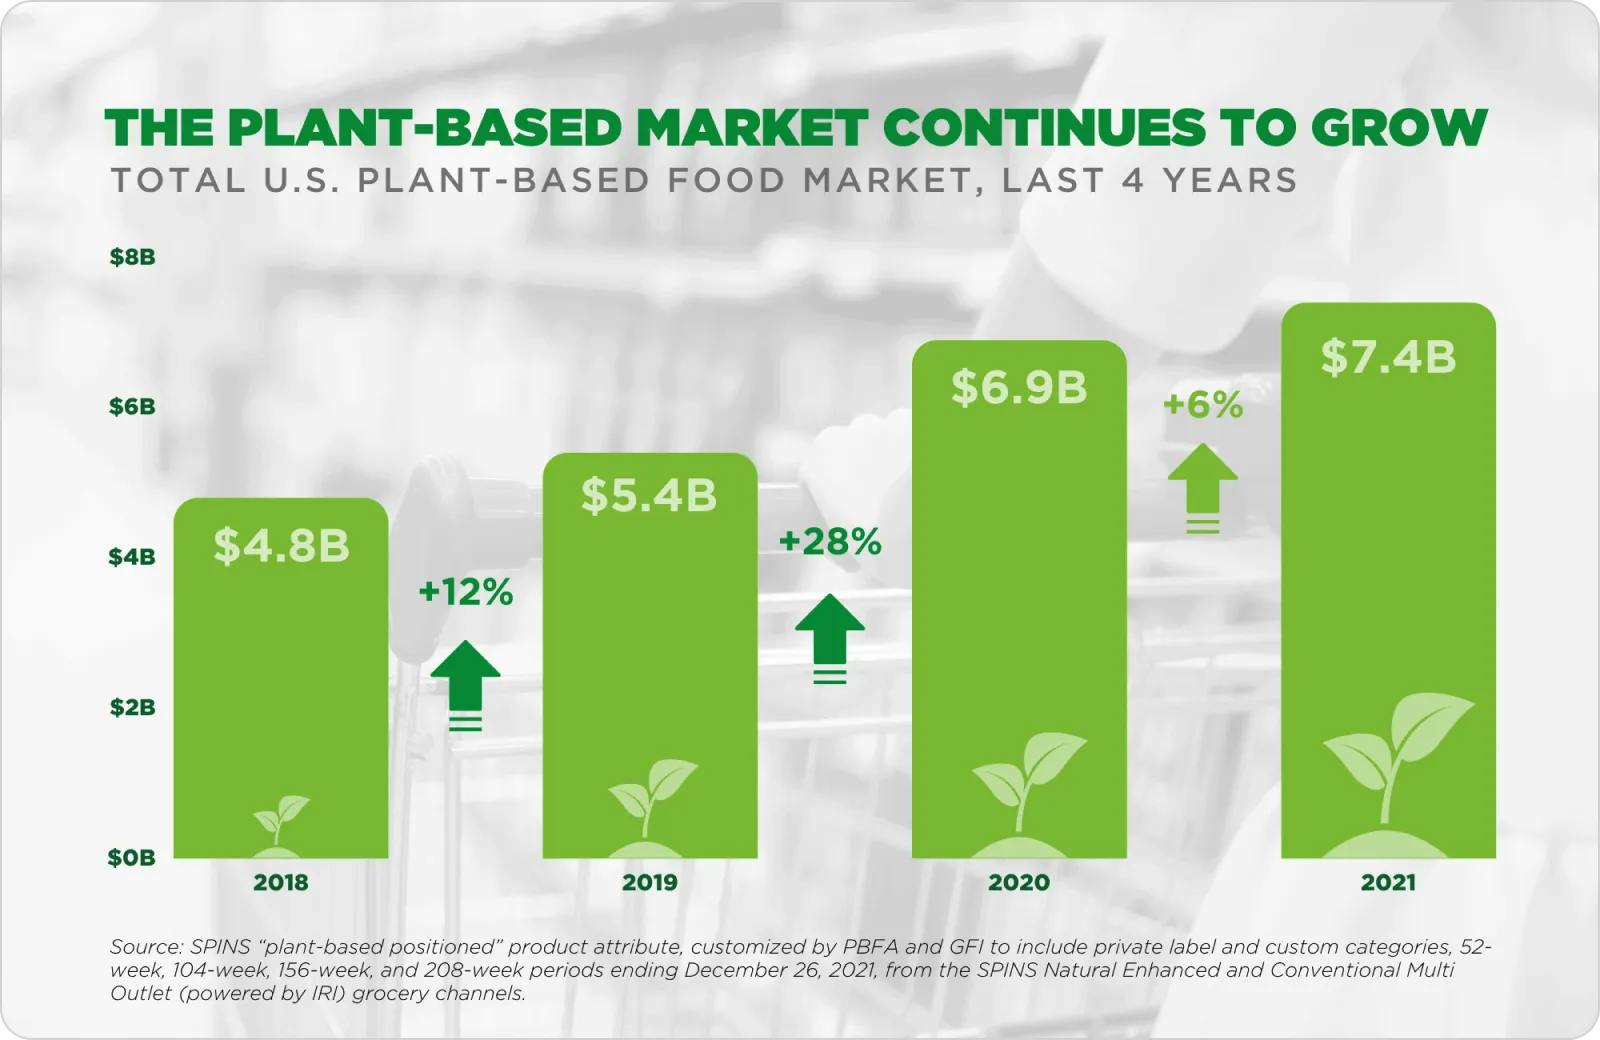 The plant based market continues to grow